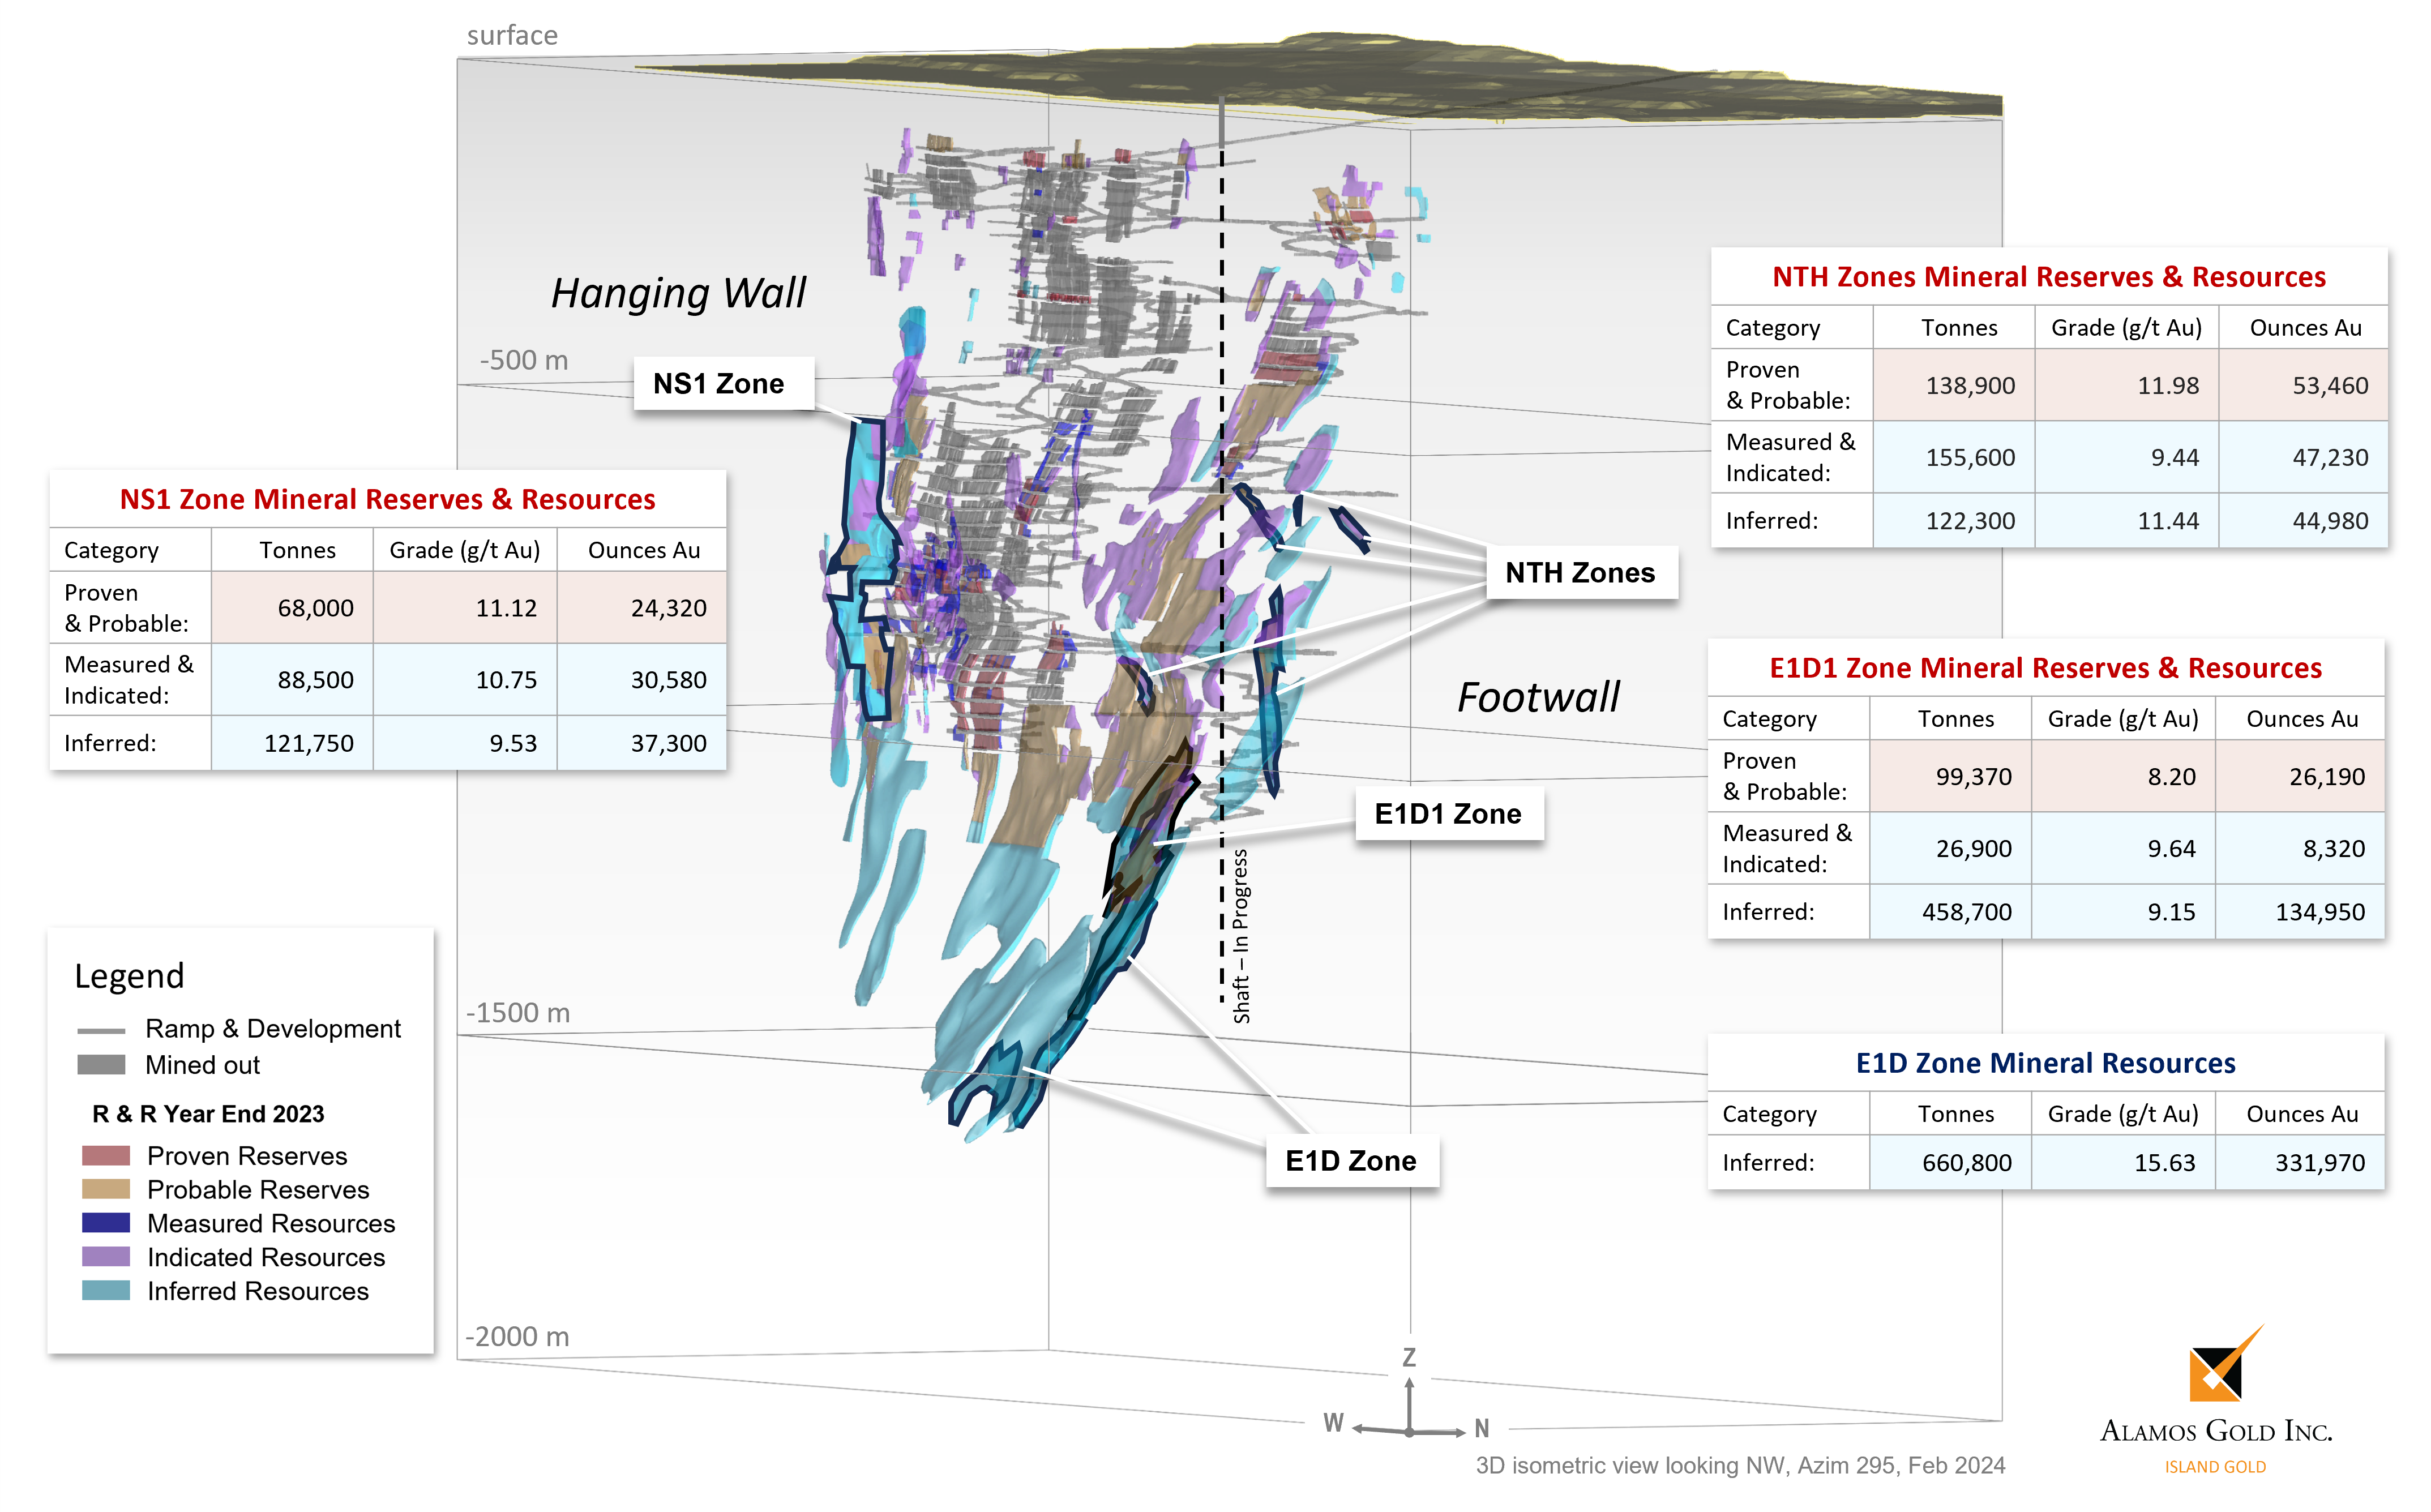 Figure 2 Island Gold Mine Hanging Wall and Footwall Zones - 2023 Mineral Reserves and Resources